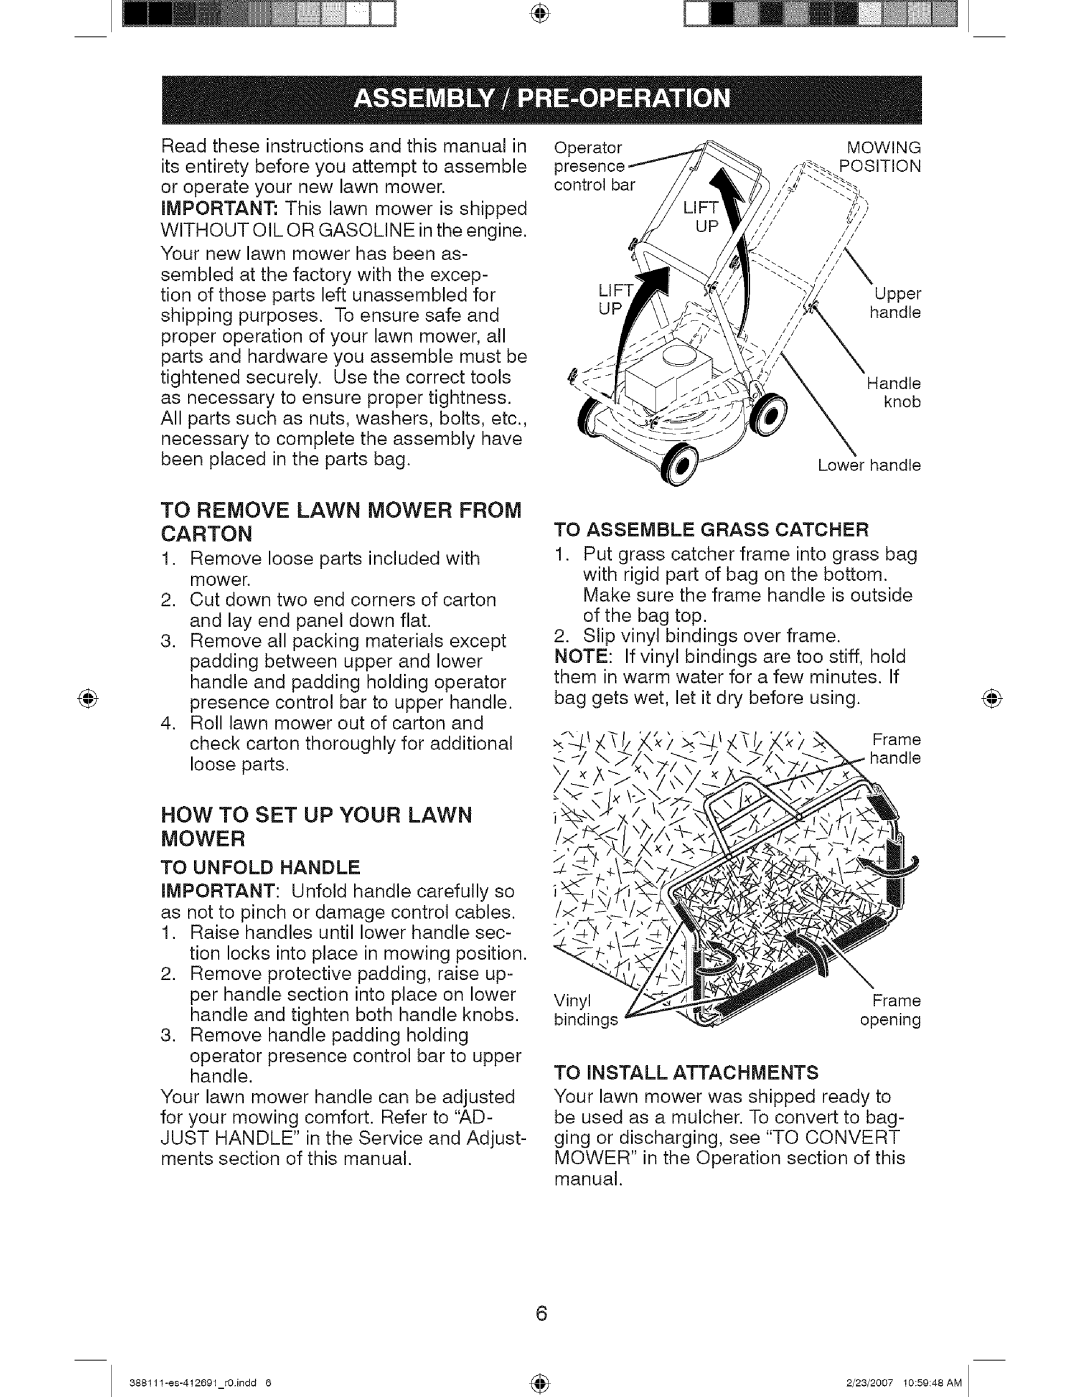 Craftsman 917 388111 owner manual To Remove Lawn Mower From Carton, How To Set Up Your Lawn 